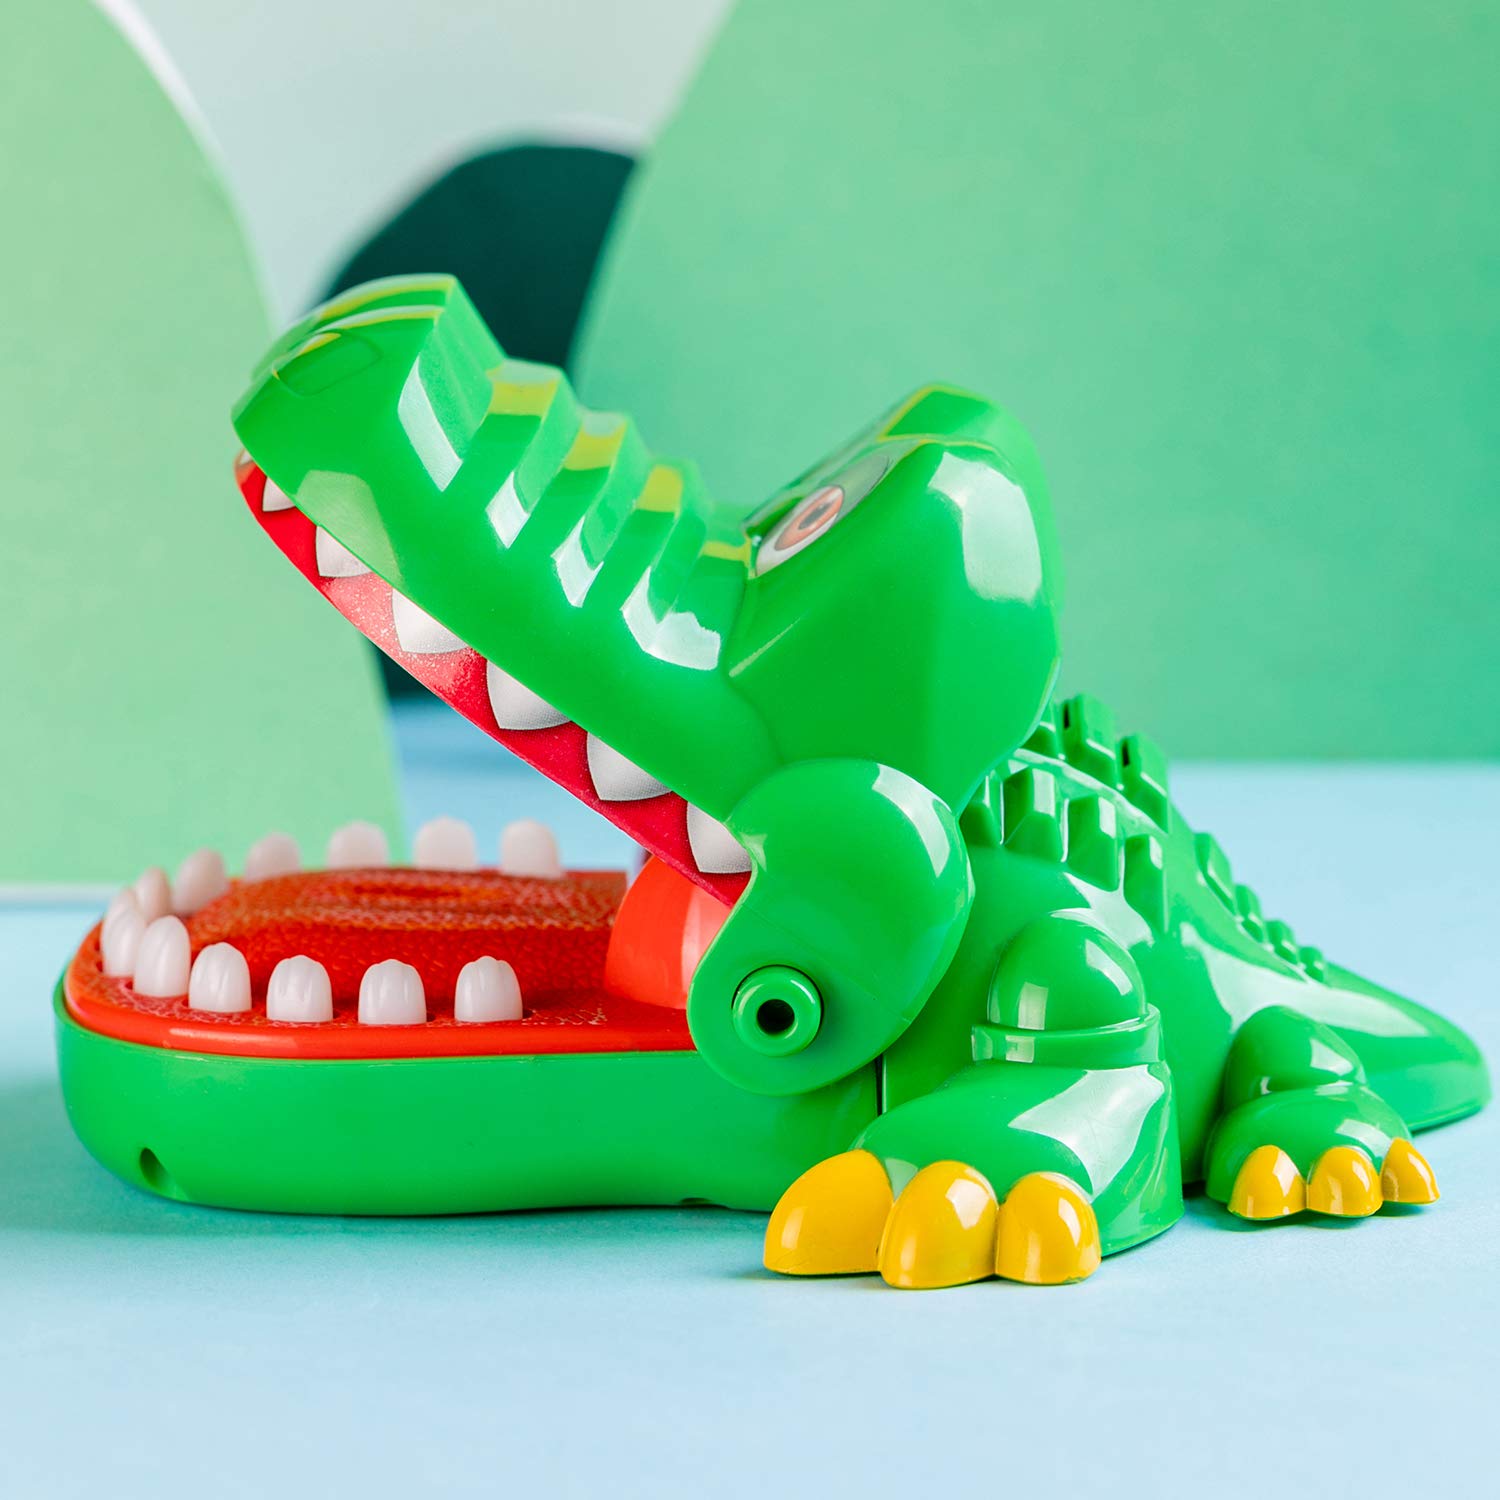 Crocodile Teeth Toys Game for Kids, Crocodile Biting Finger Dentist Games Funny Toys, 2020 Version Ages 4 and Up